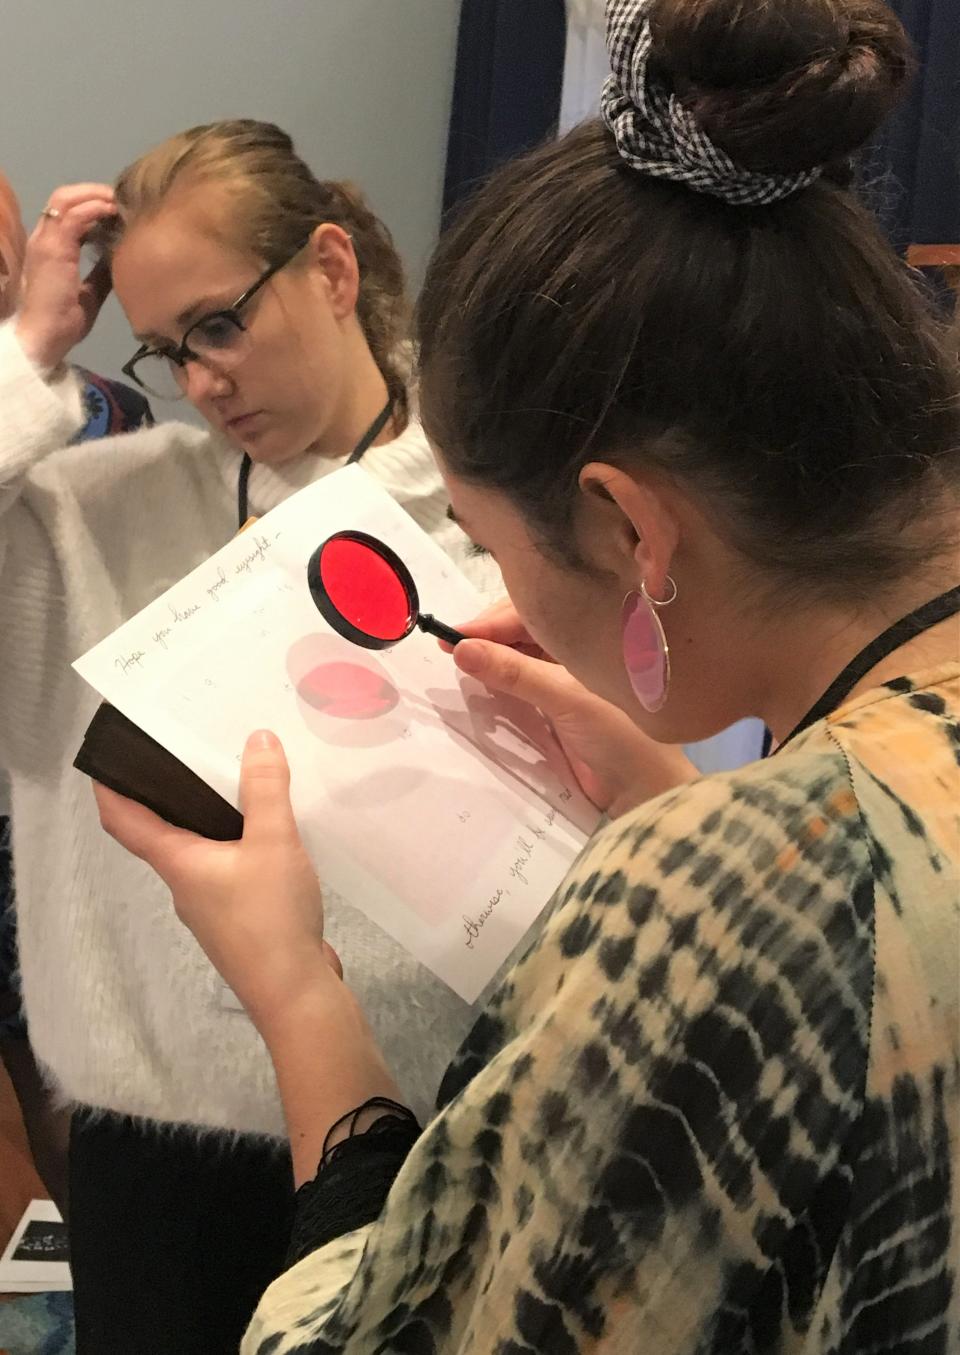 Kate Colvin, foreground, works on solving a puzzle during an escape room event.